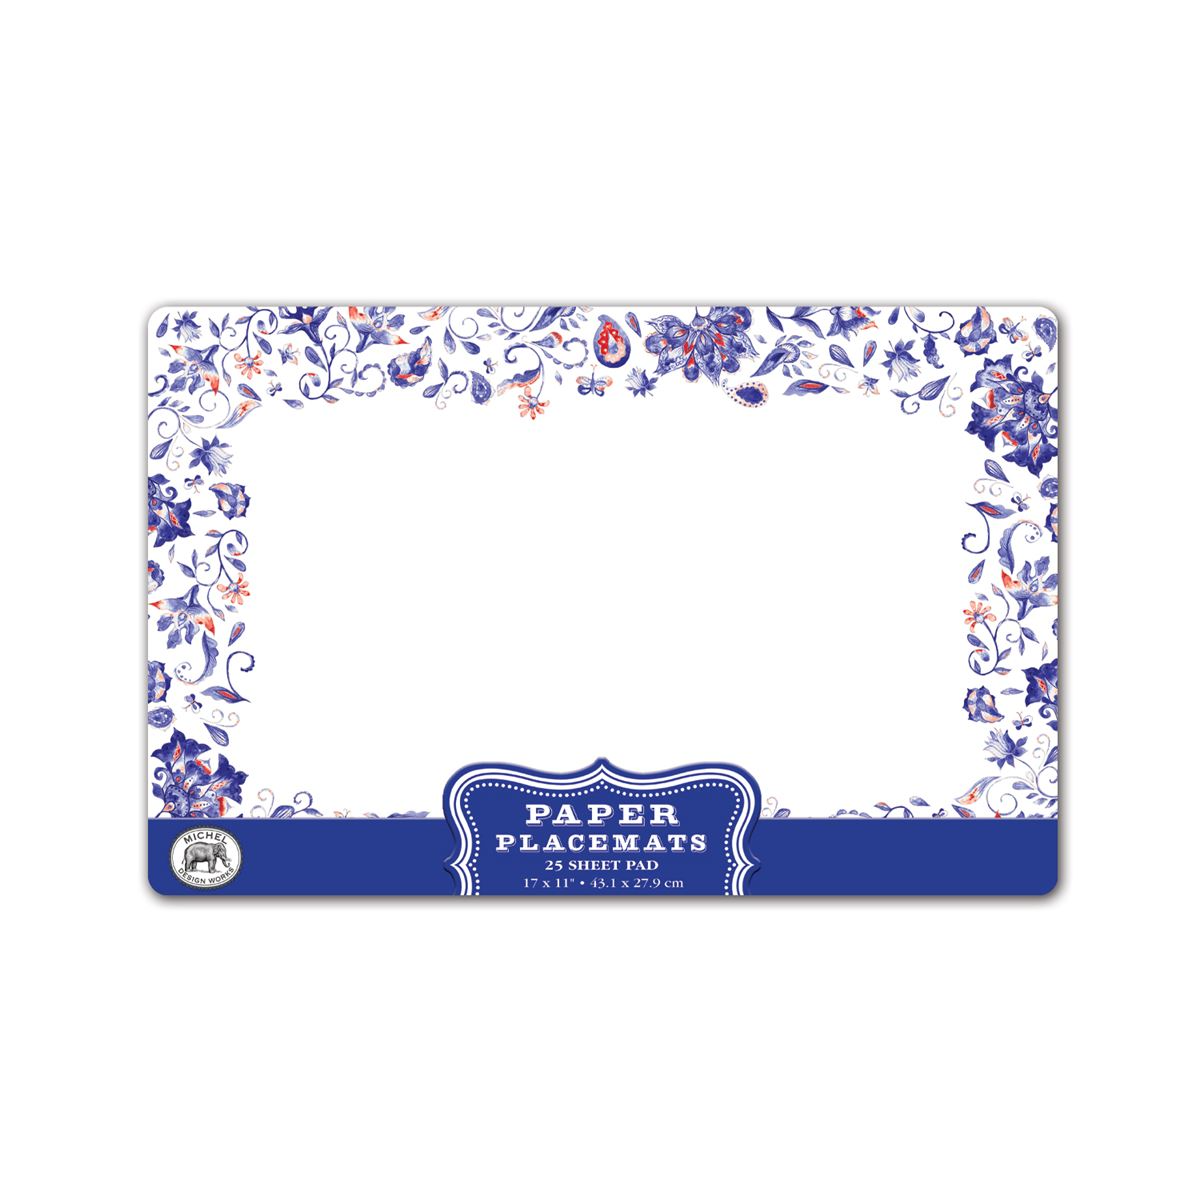 Michel Design Works Paisley & Plaid Paper Placemats (pack of 25) *final few